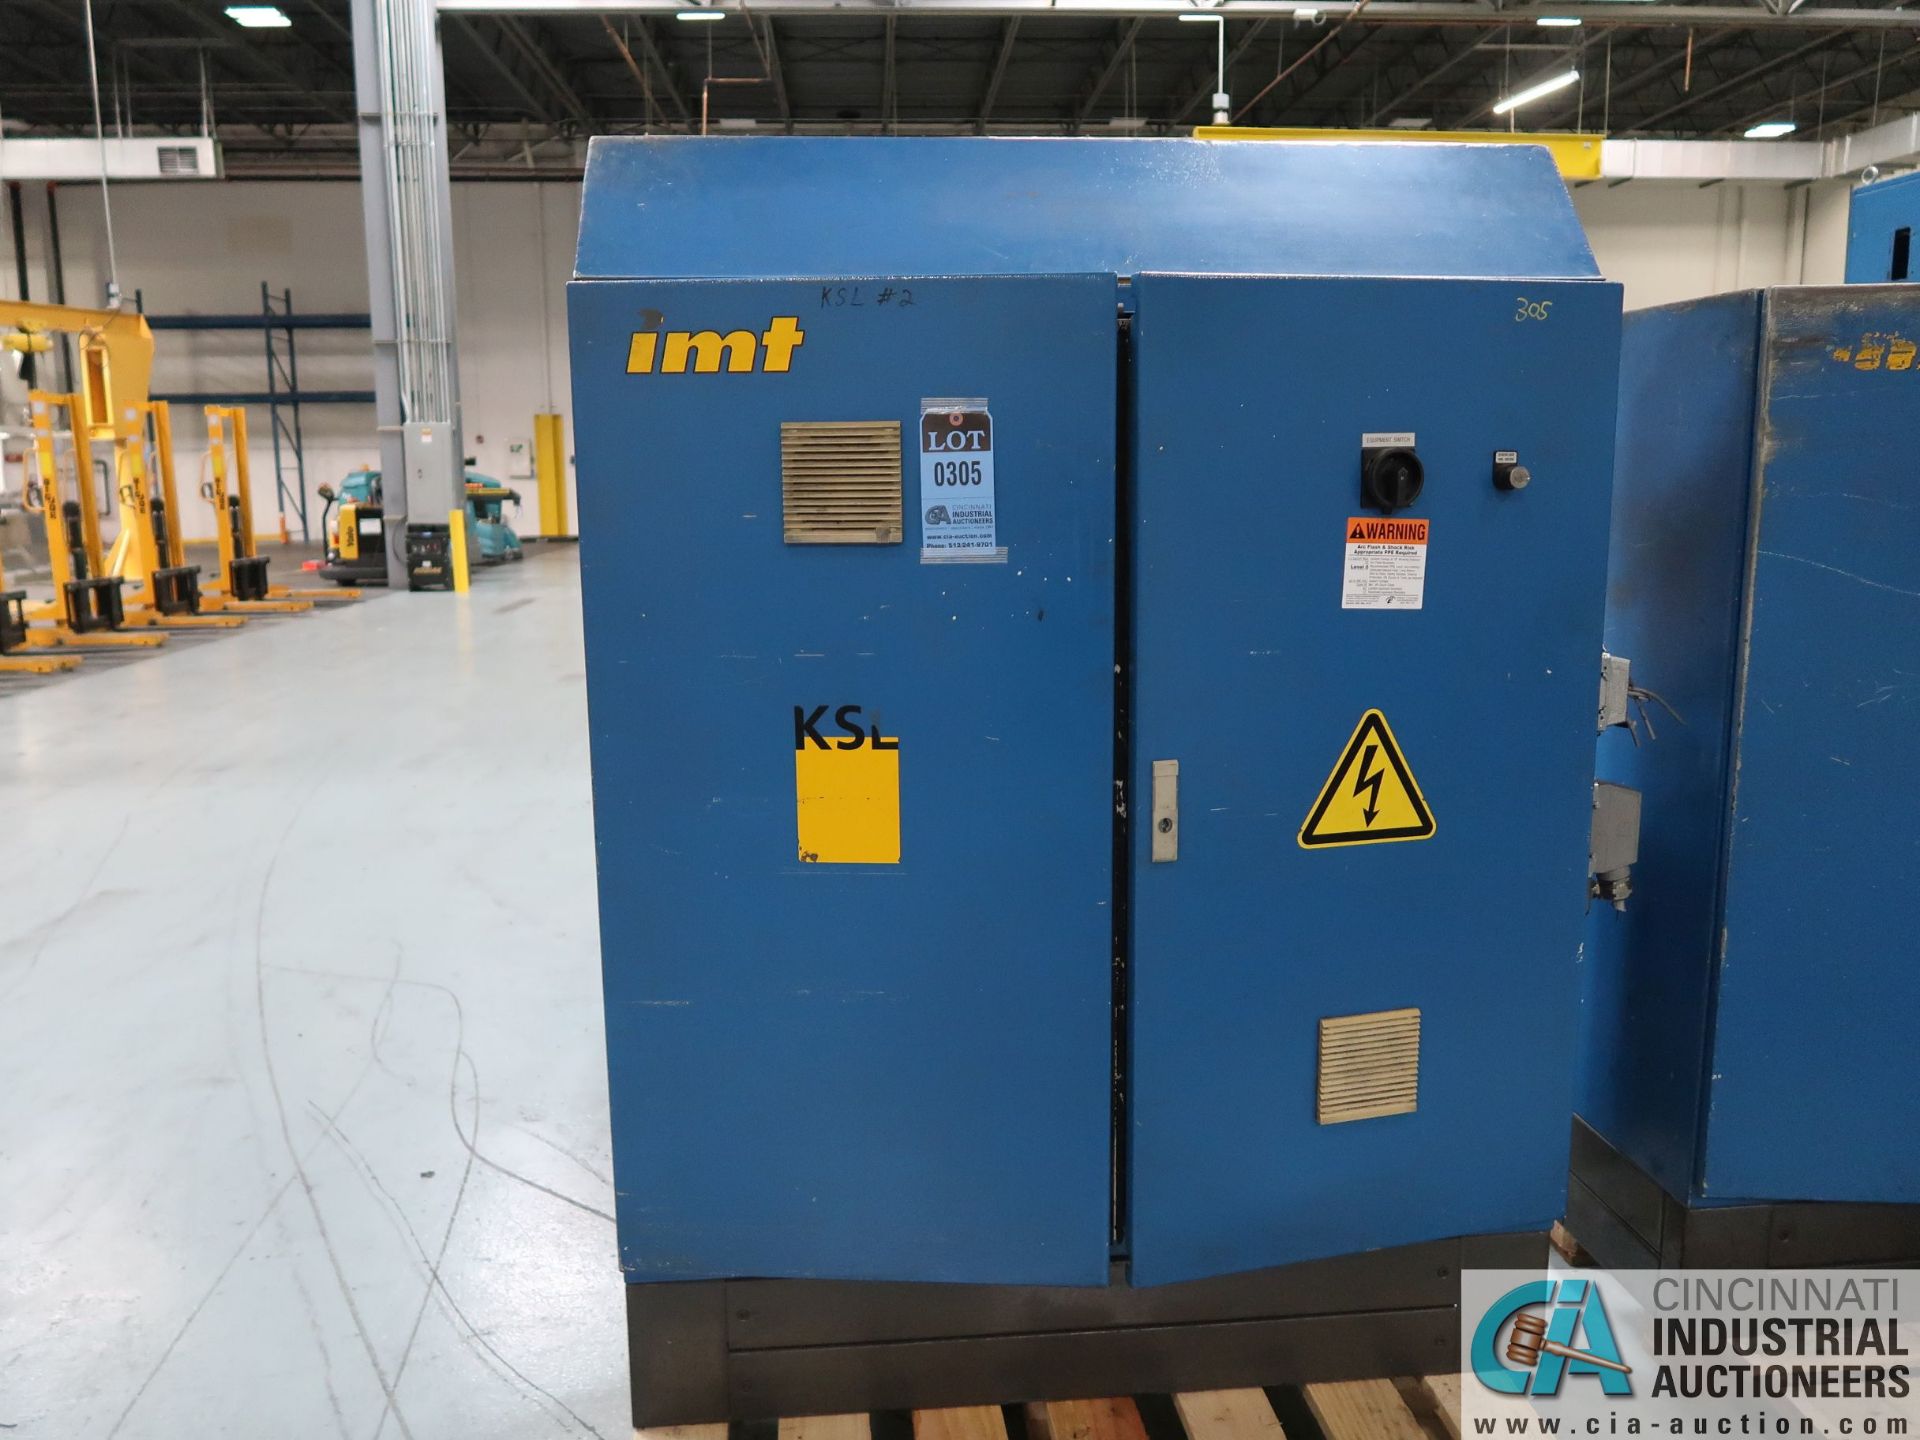 IMT TYPE KSL-2 ELECTRICAL MACHINE CONTROL CABINET WITH ELECTRICAL COMPONENTS; 16" X 47" X 63" HIGH